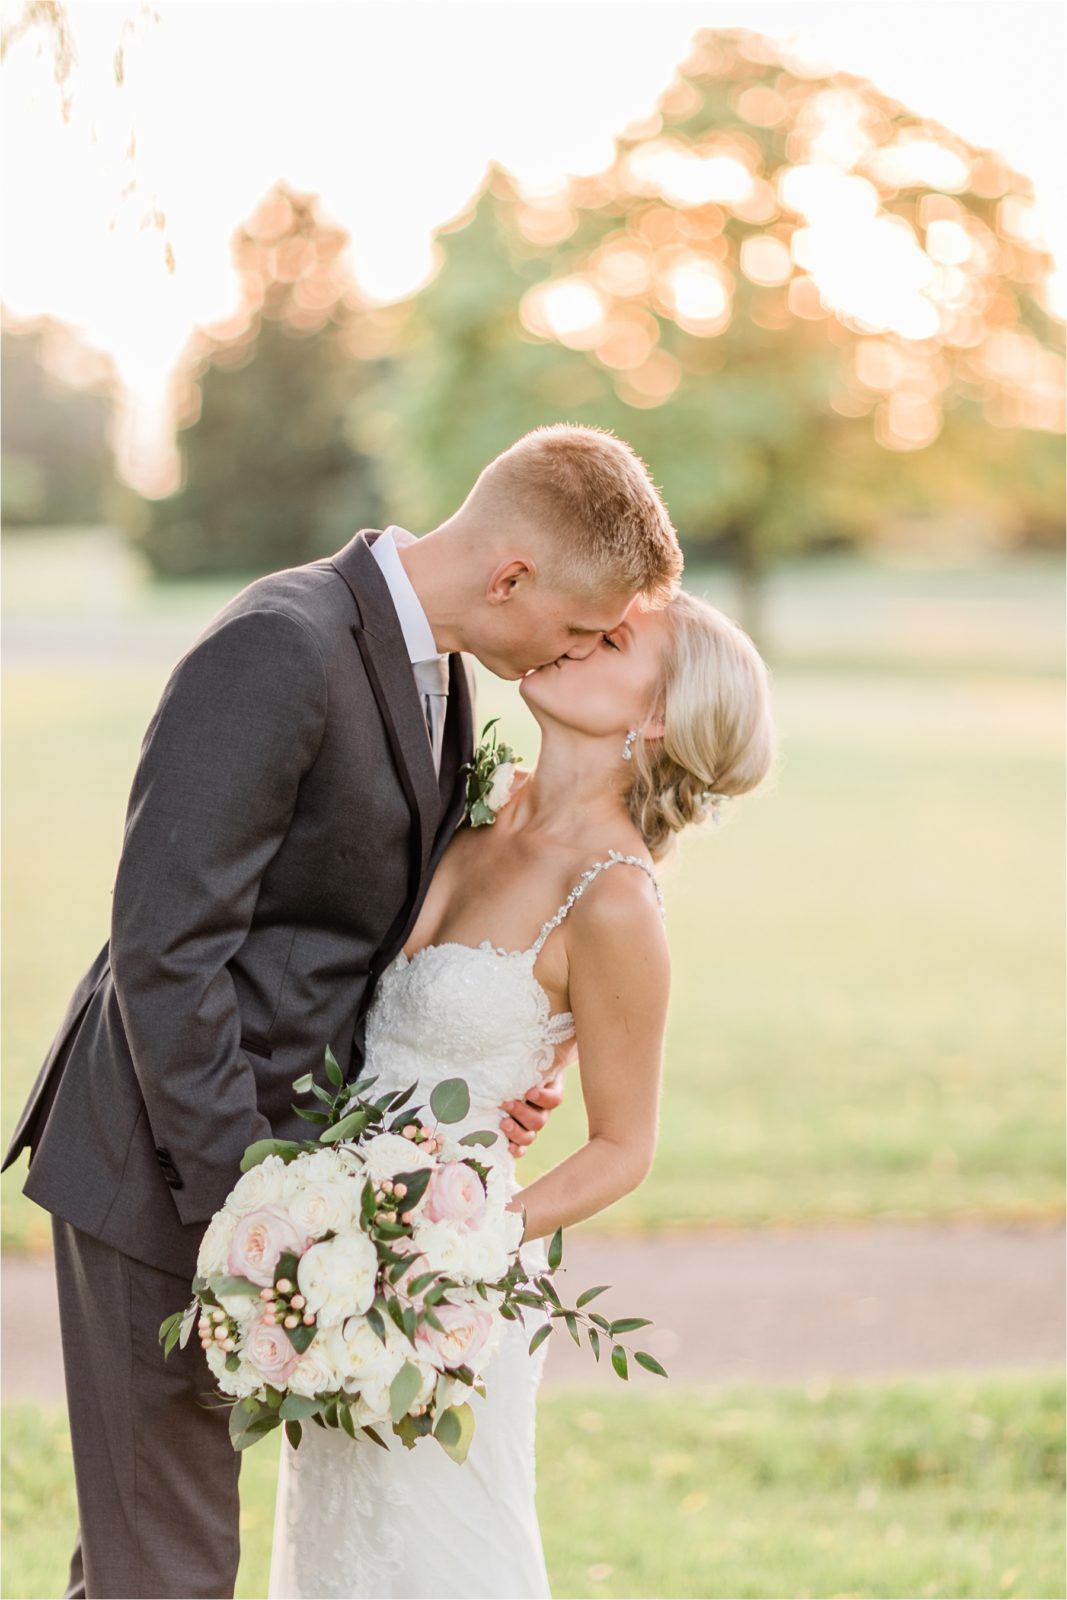 Sunset Bridal Portraits at River Club of Mequon